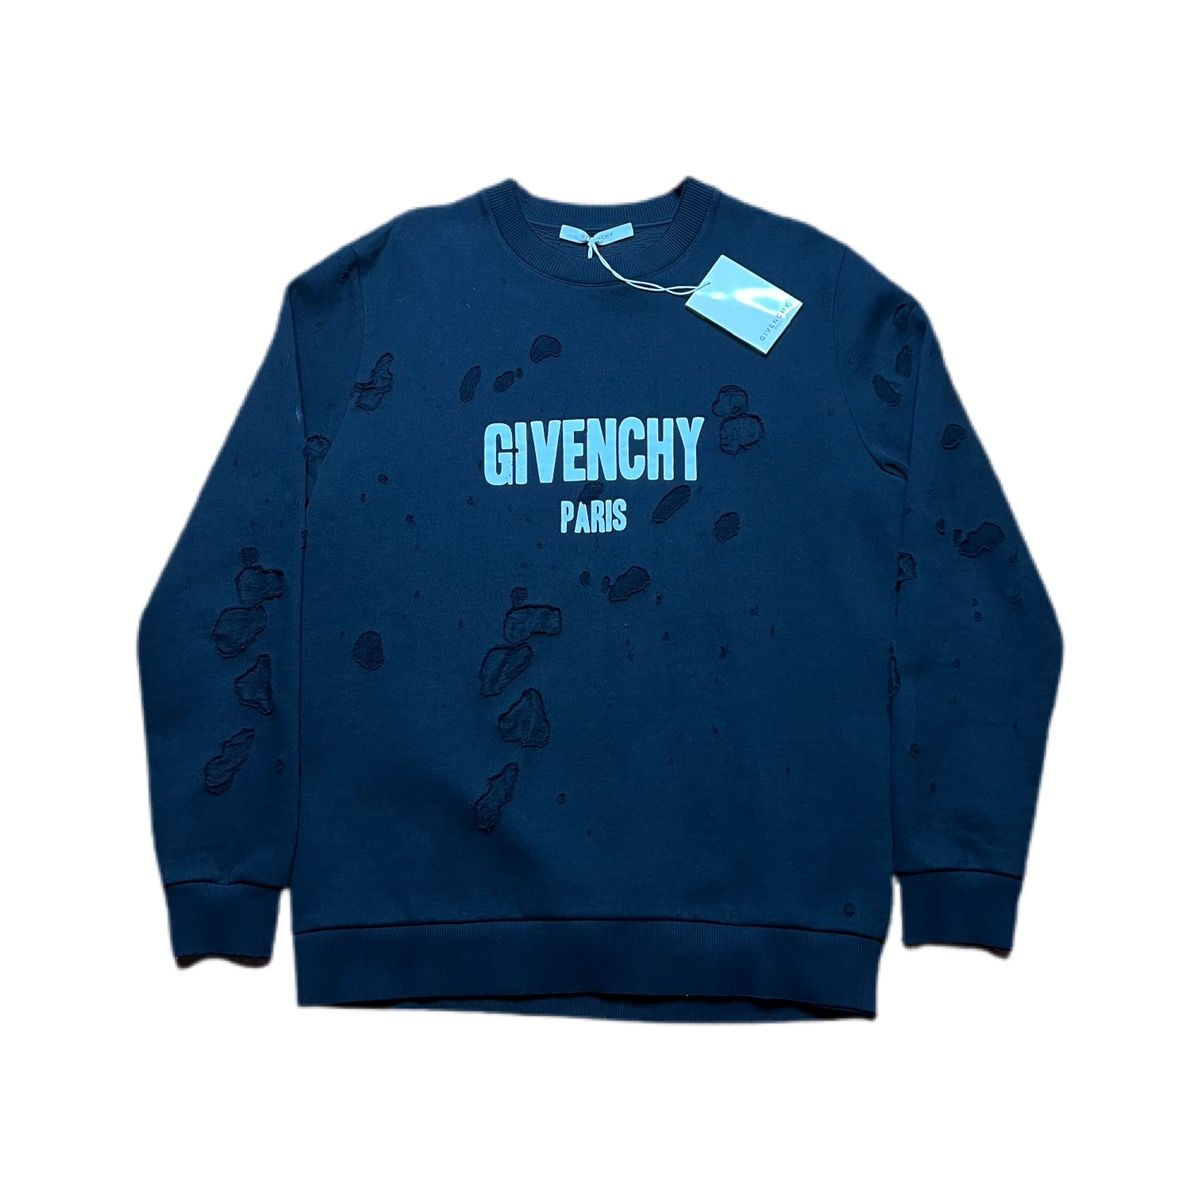 Givenchy Givenchy Paris Distressed Crewneck Sweater | Grailed